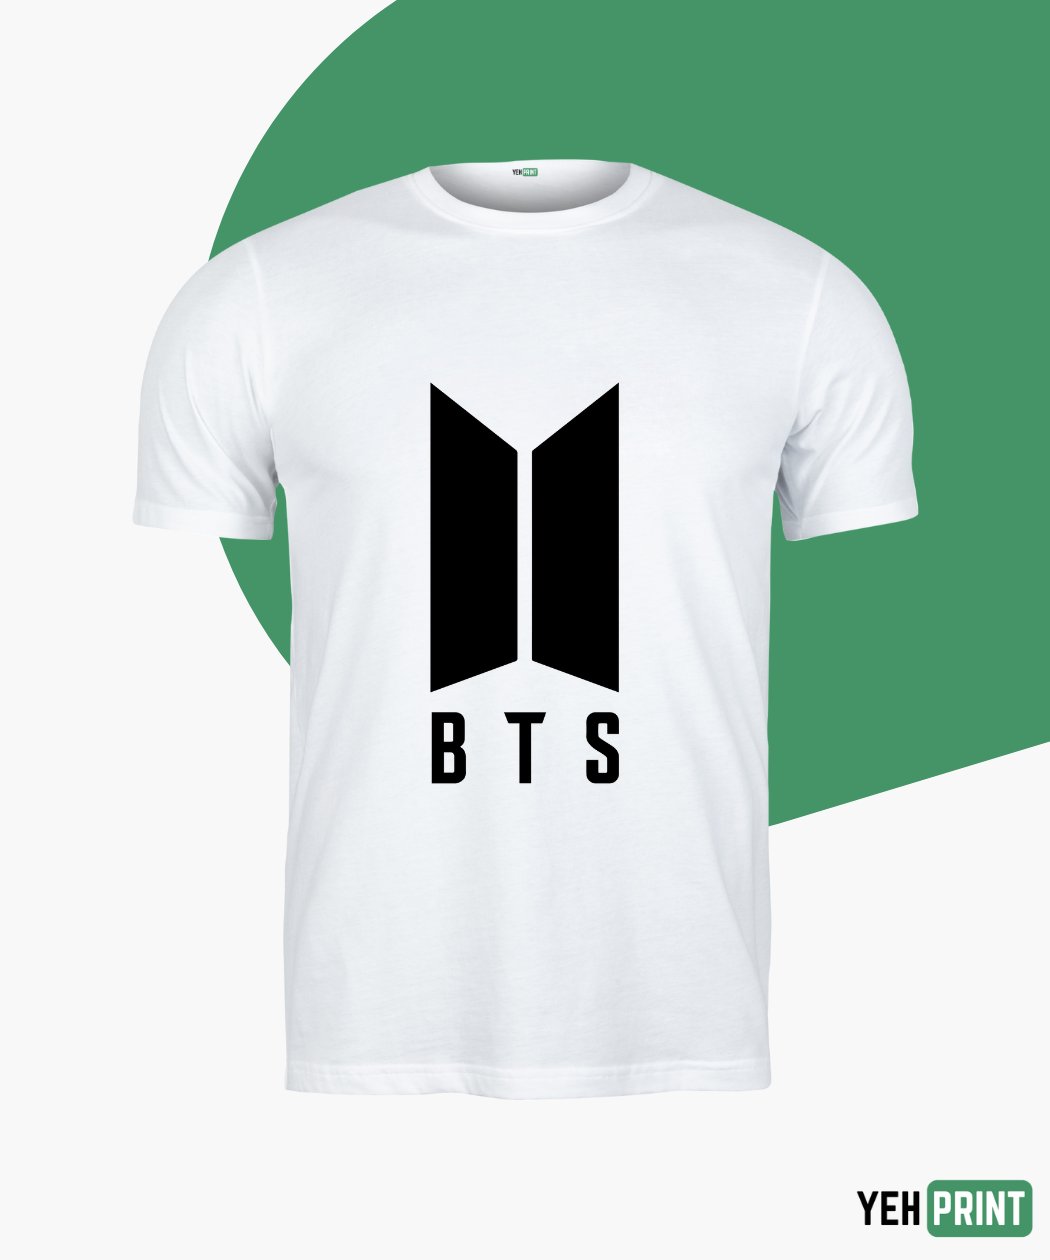 BTS T-Shirts - Show Your Love for Bangtan Boys in Pakistan